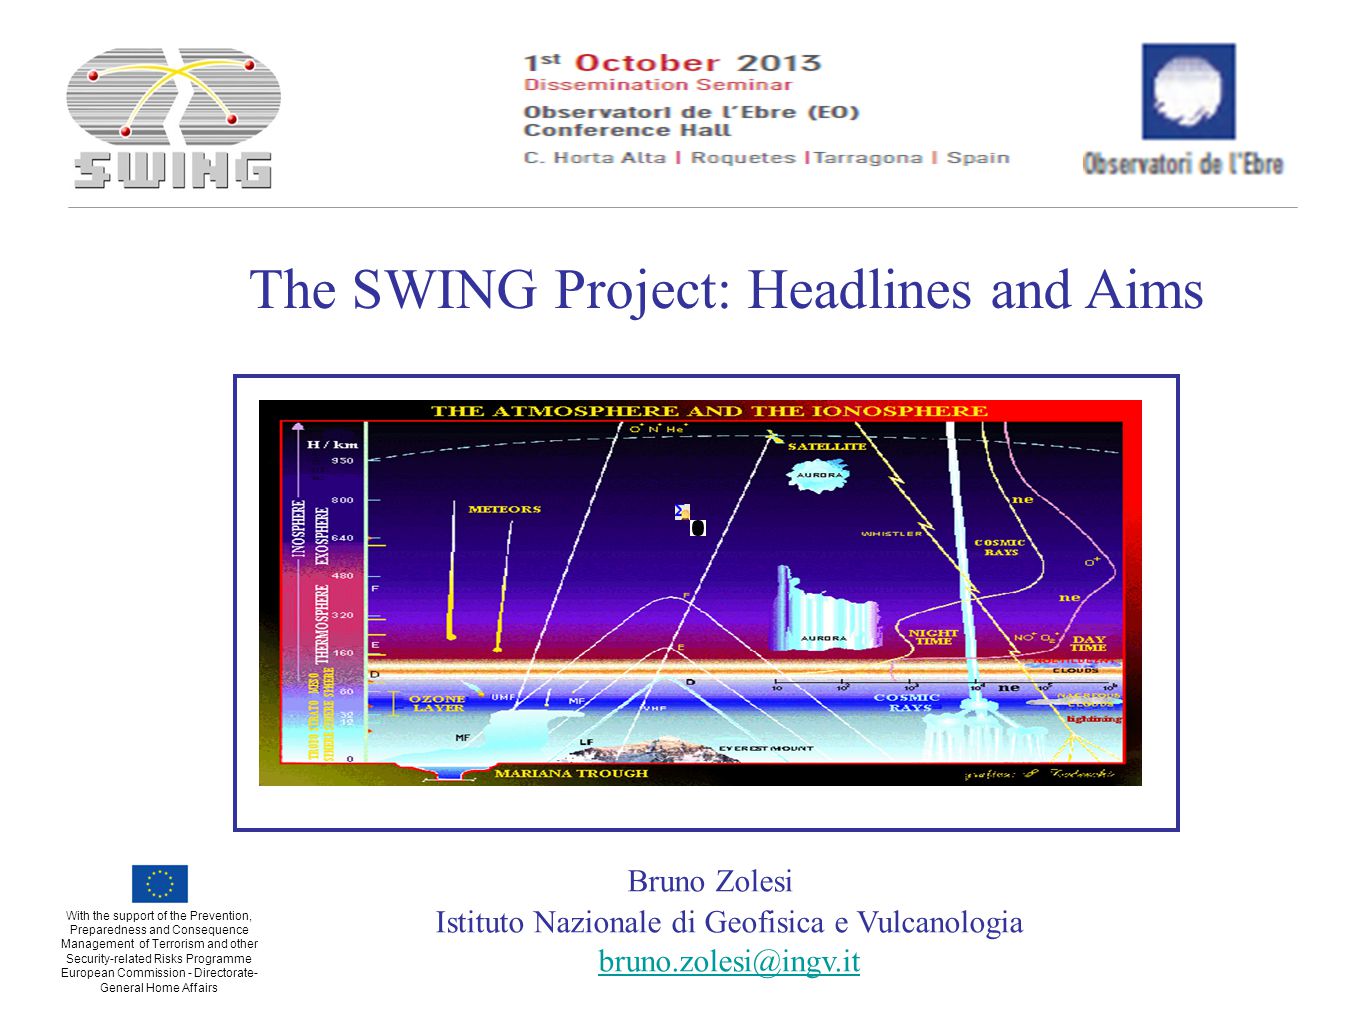 Bruno Zolesi Istituto Nazionale di Geofisica e Vulcanologia The SWING Project: Headlines and Aims With the support of the Prevention, Preparedness and Consequence Management of Terrorism and other Security-related Risks Programme European Commission - Directorate- General Home Affairs